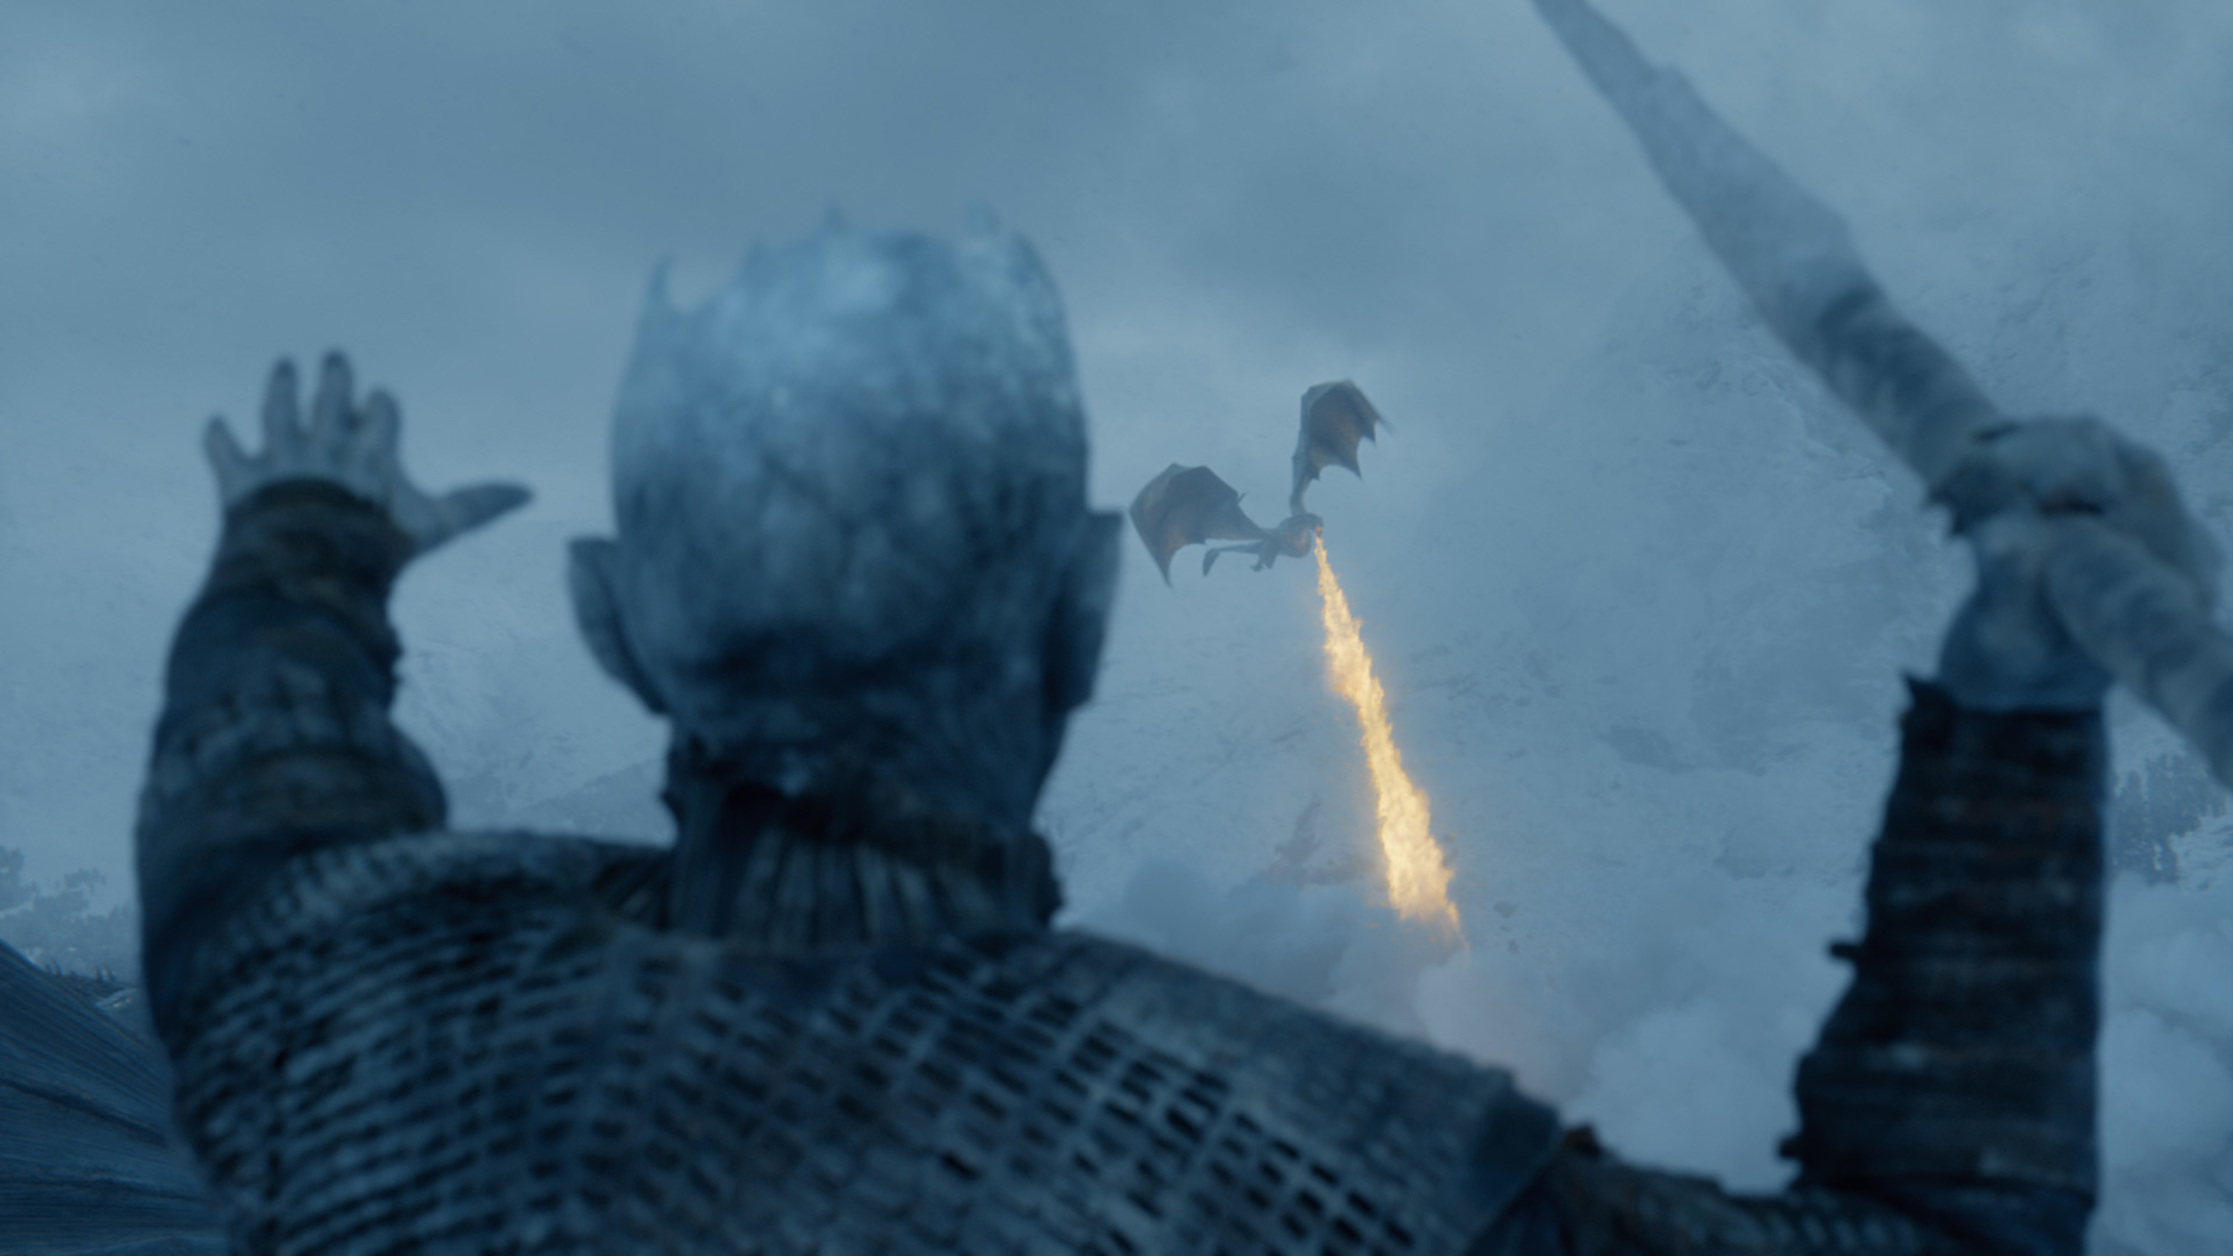 The Night King aims an Ice Spear at the dragon Viserion north of the wall